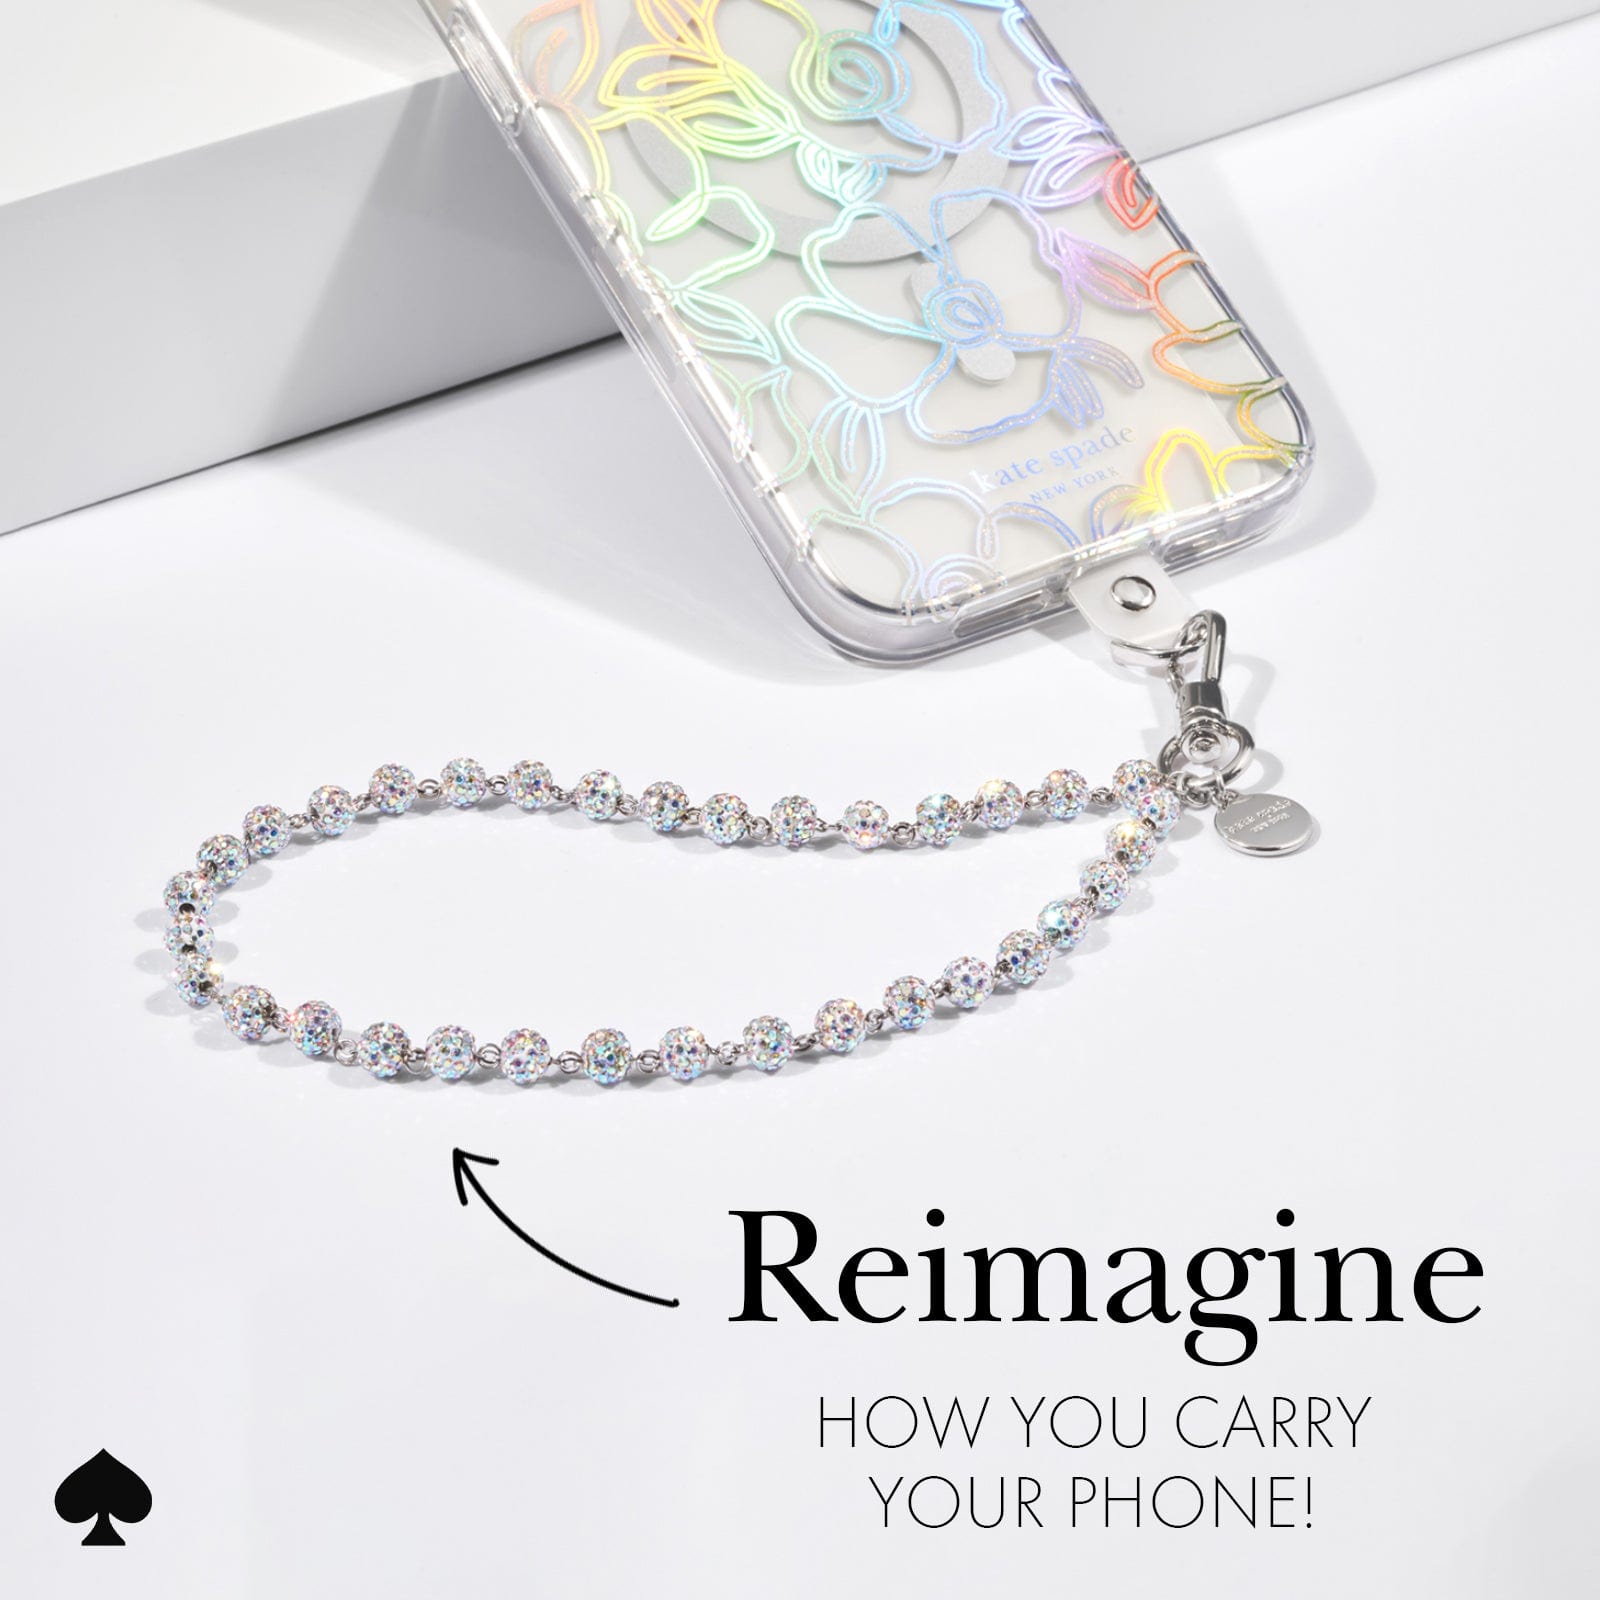 REIMAGINE HOW YOU CARRY YOUR PHONE